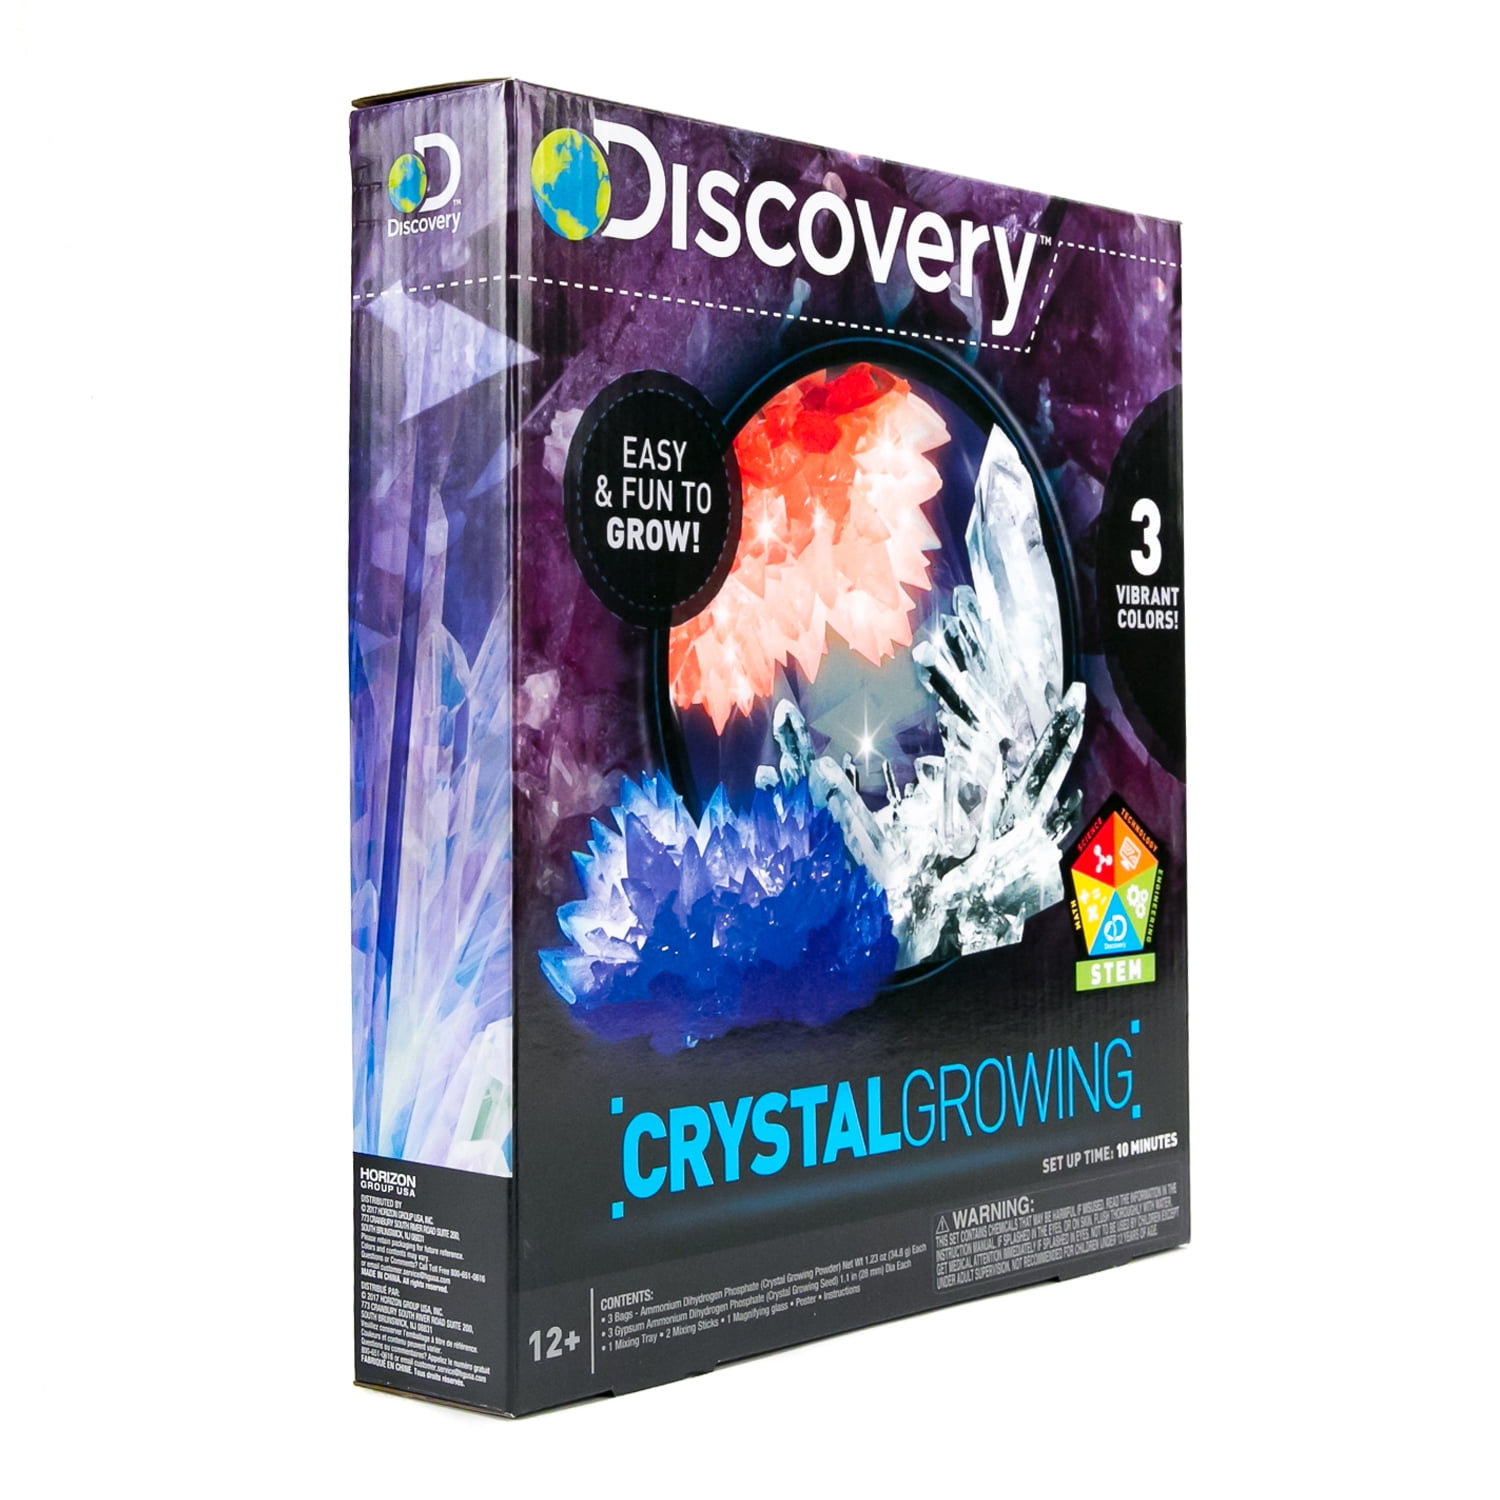 NEW Fun and Easy to Grow 3 Vibrant Colors Details about   Discovery Crystal Growing 